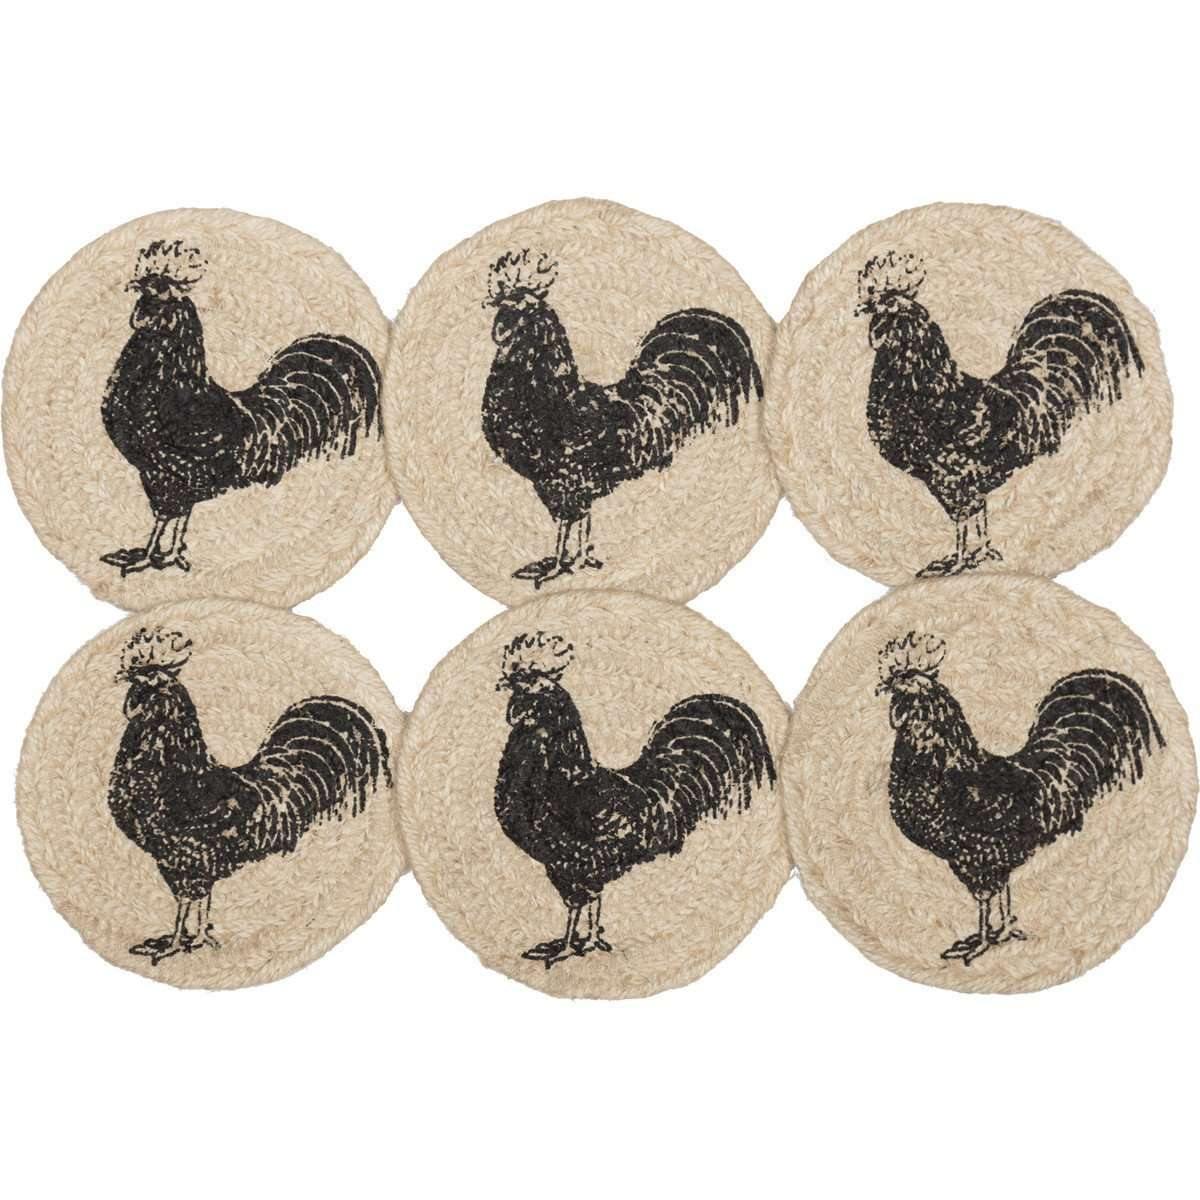 Sawyer Mill Charcoal Poultry Jute Coaster Set of 6 VHC Brands